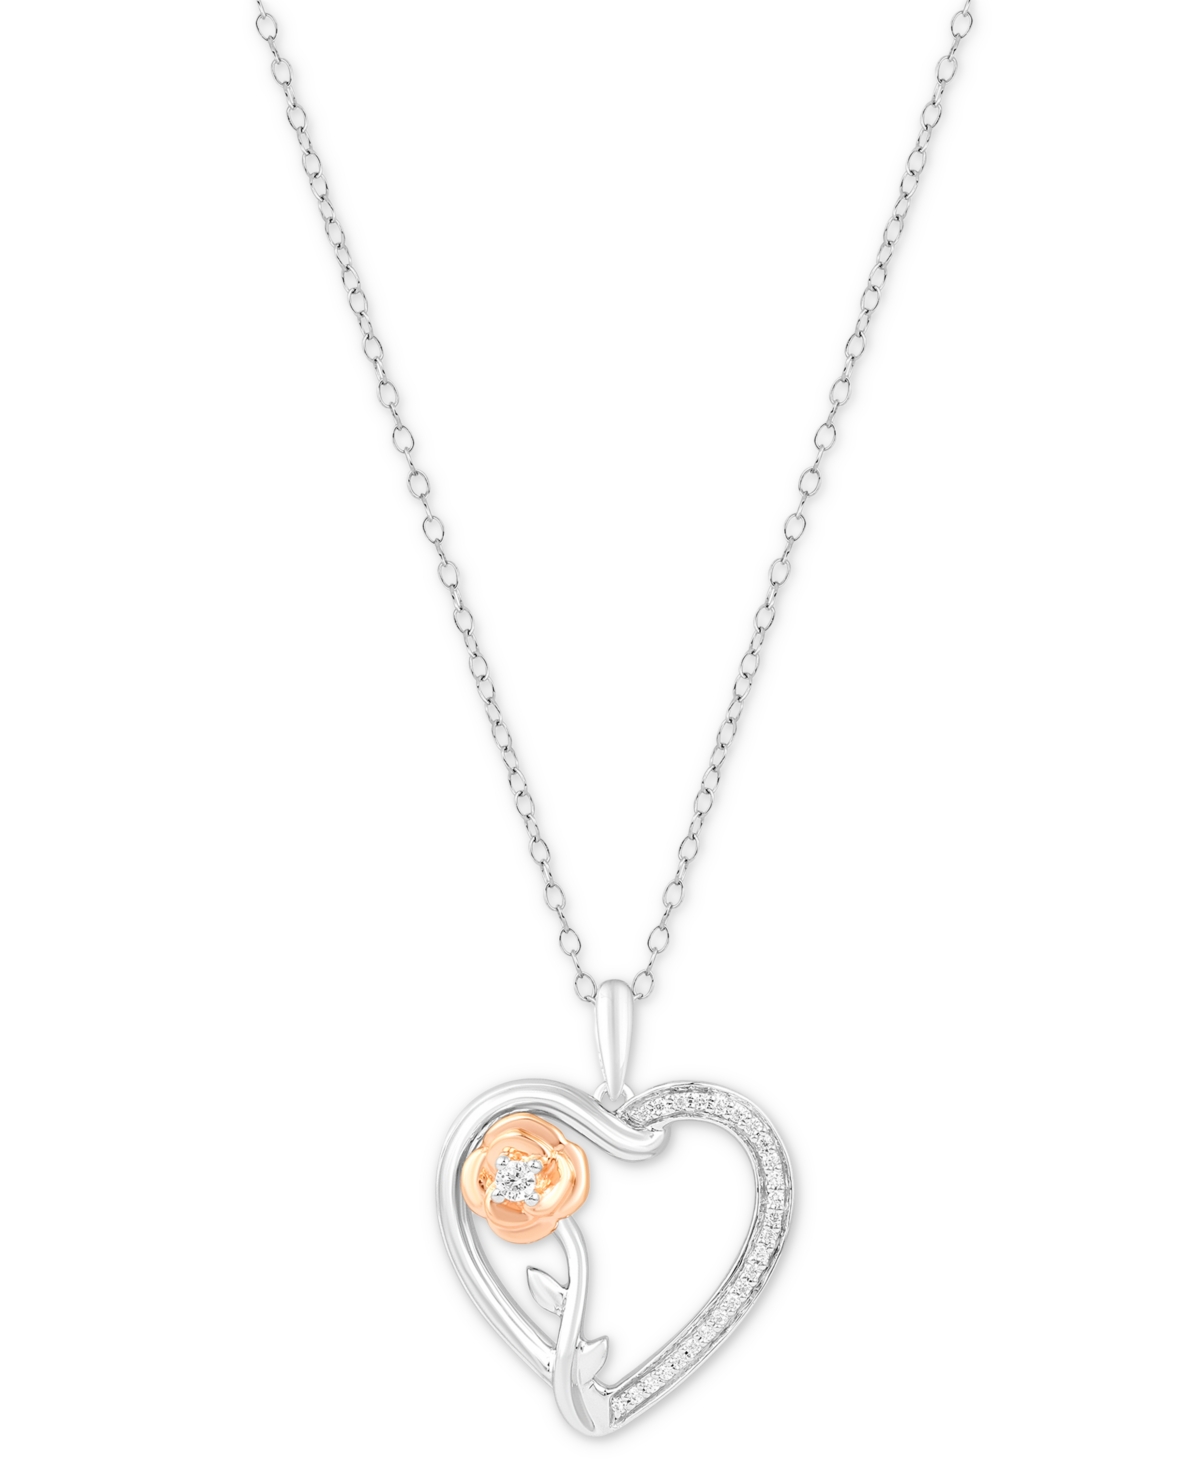 Diamond Belle Rose & Heart Pendant Necklace (1/10 ct. t.w.) in Sterling Silver & 14k Rose Gold-Plate - Two-Tone